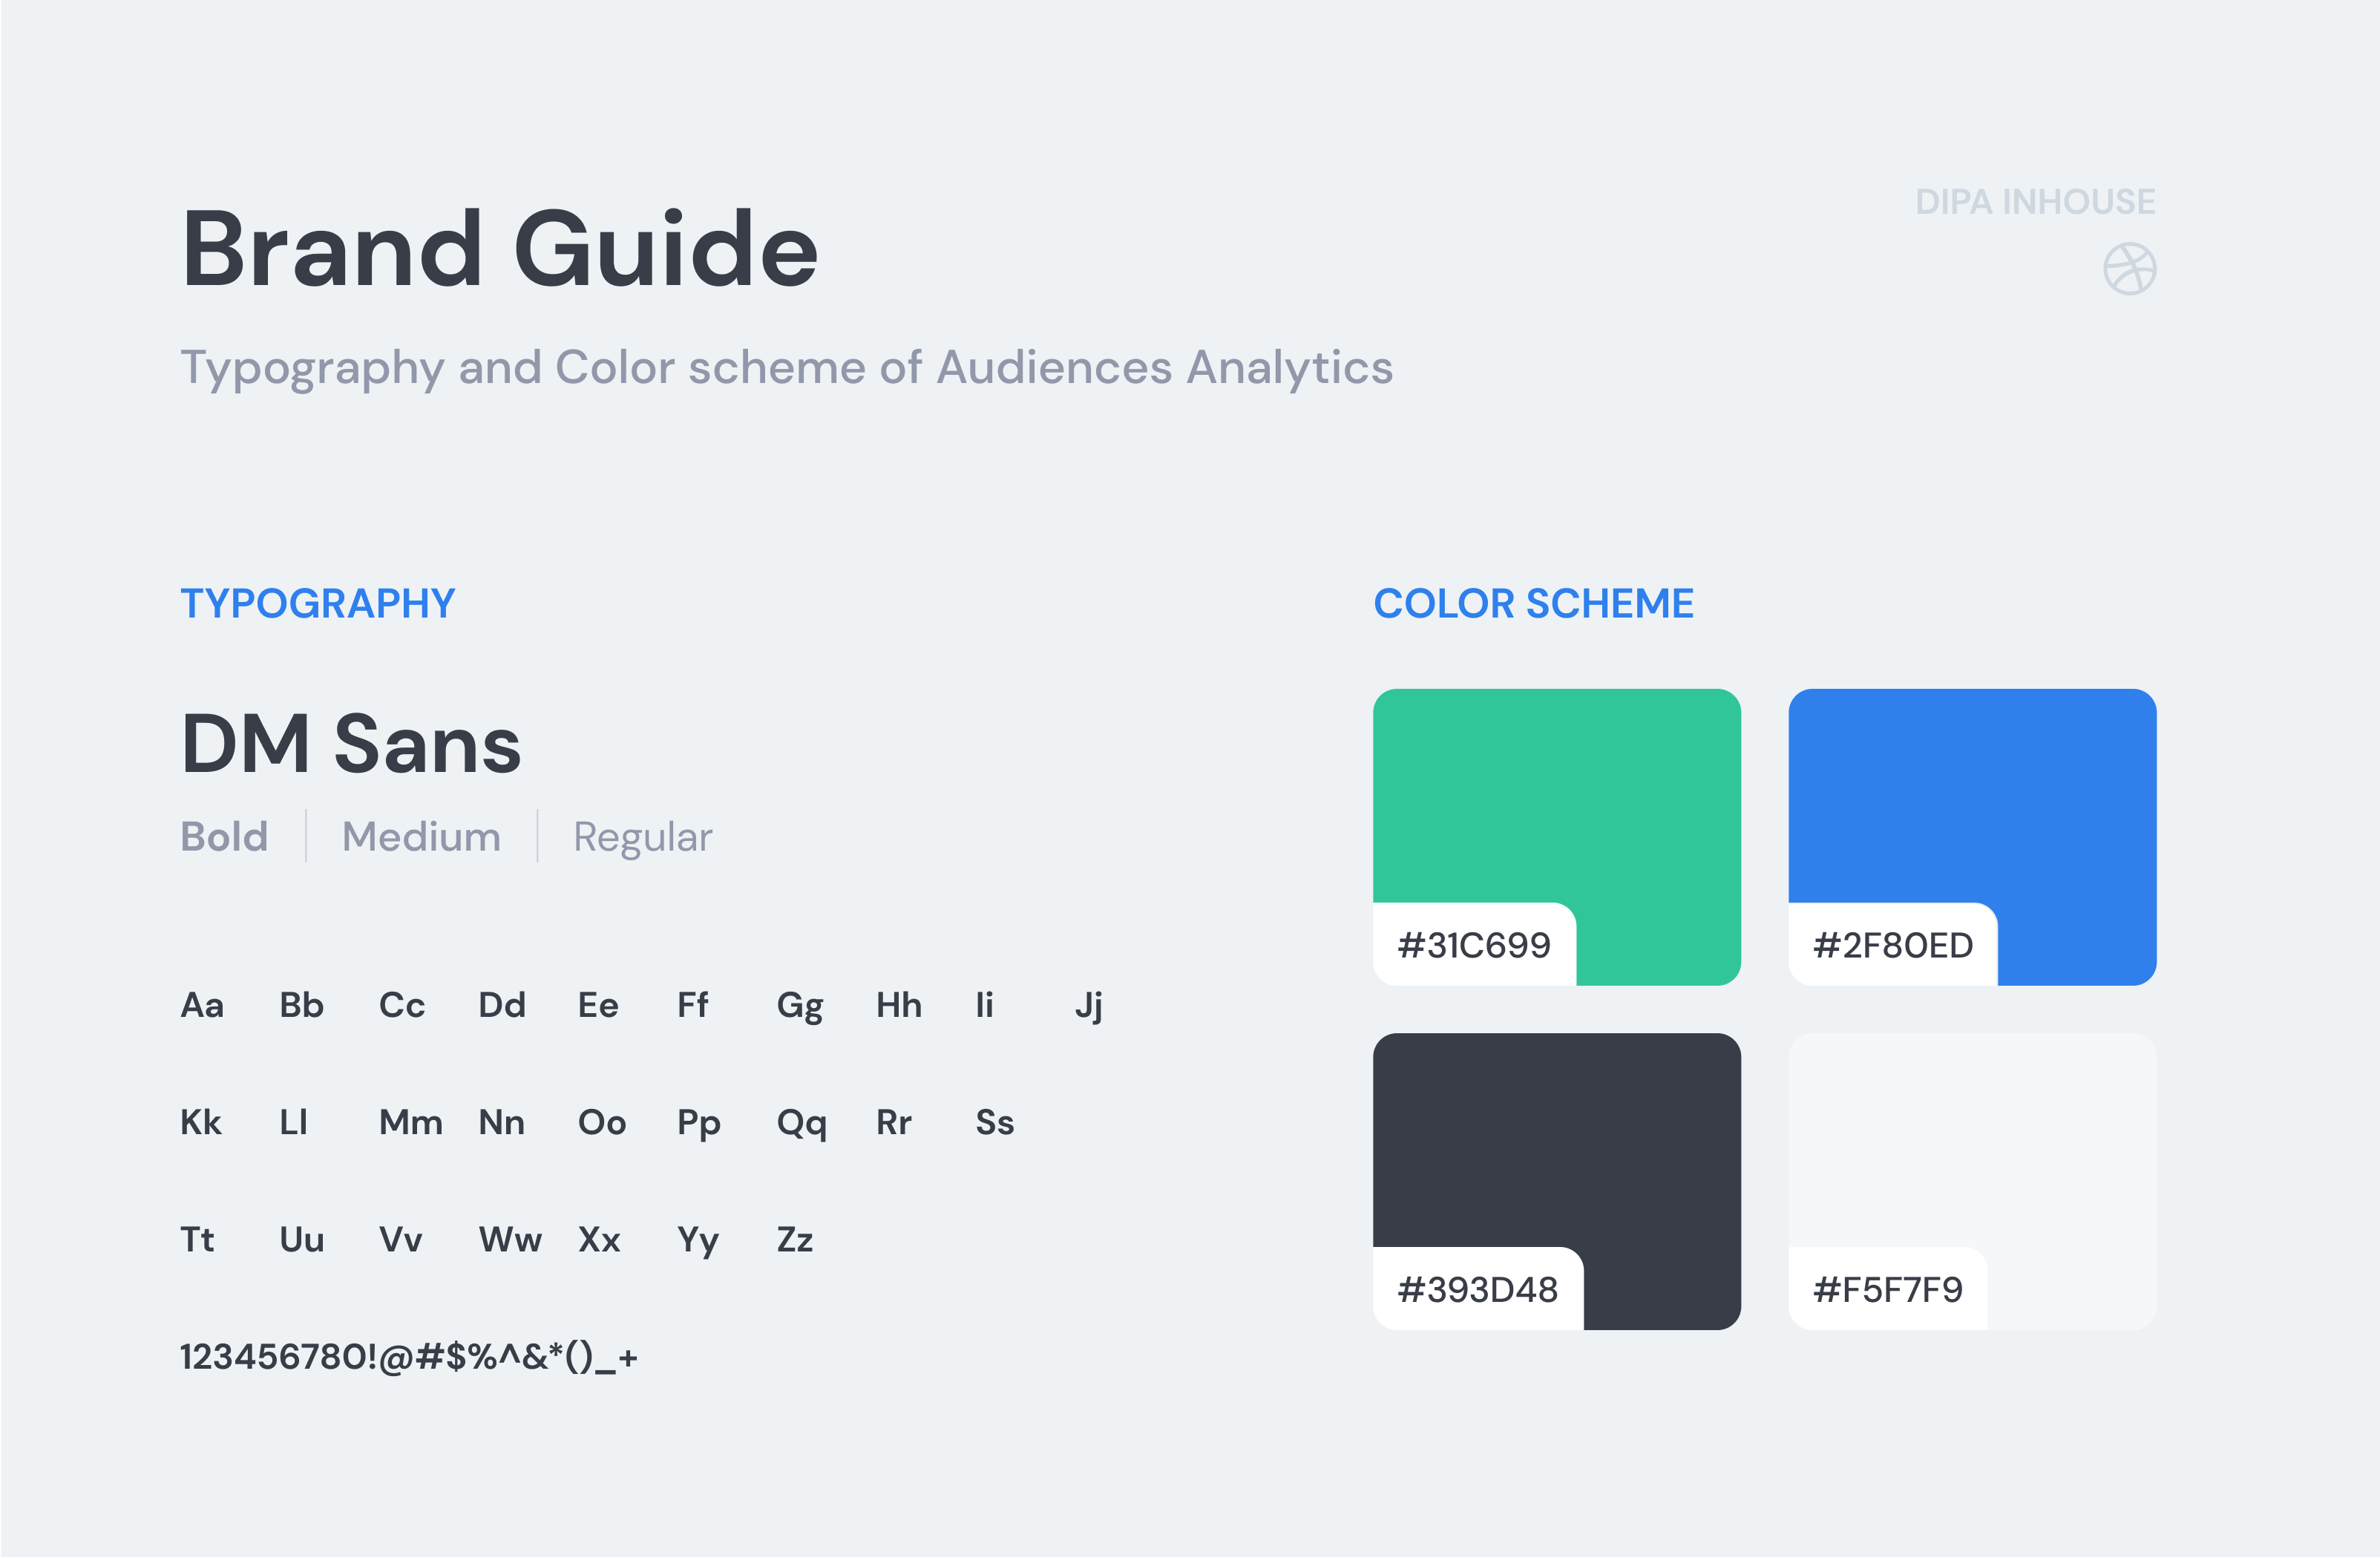 Audiences Analytics - Web App by Pixelate Design for Dipa Inhouse on ...